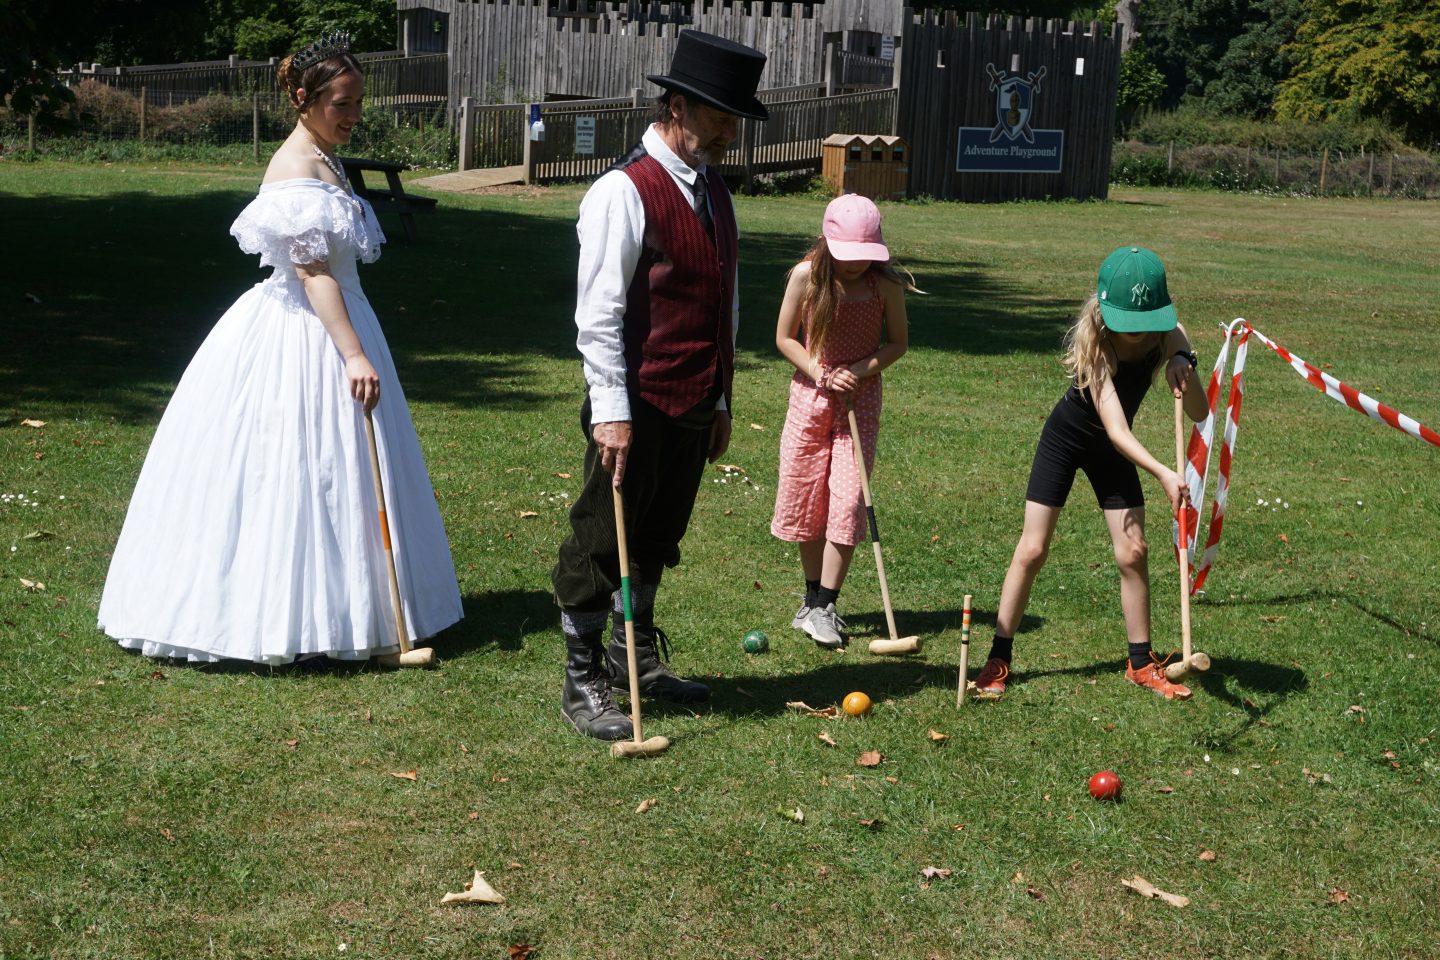 Children playing croquet with Victorian characters on a grass lawn